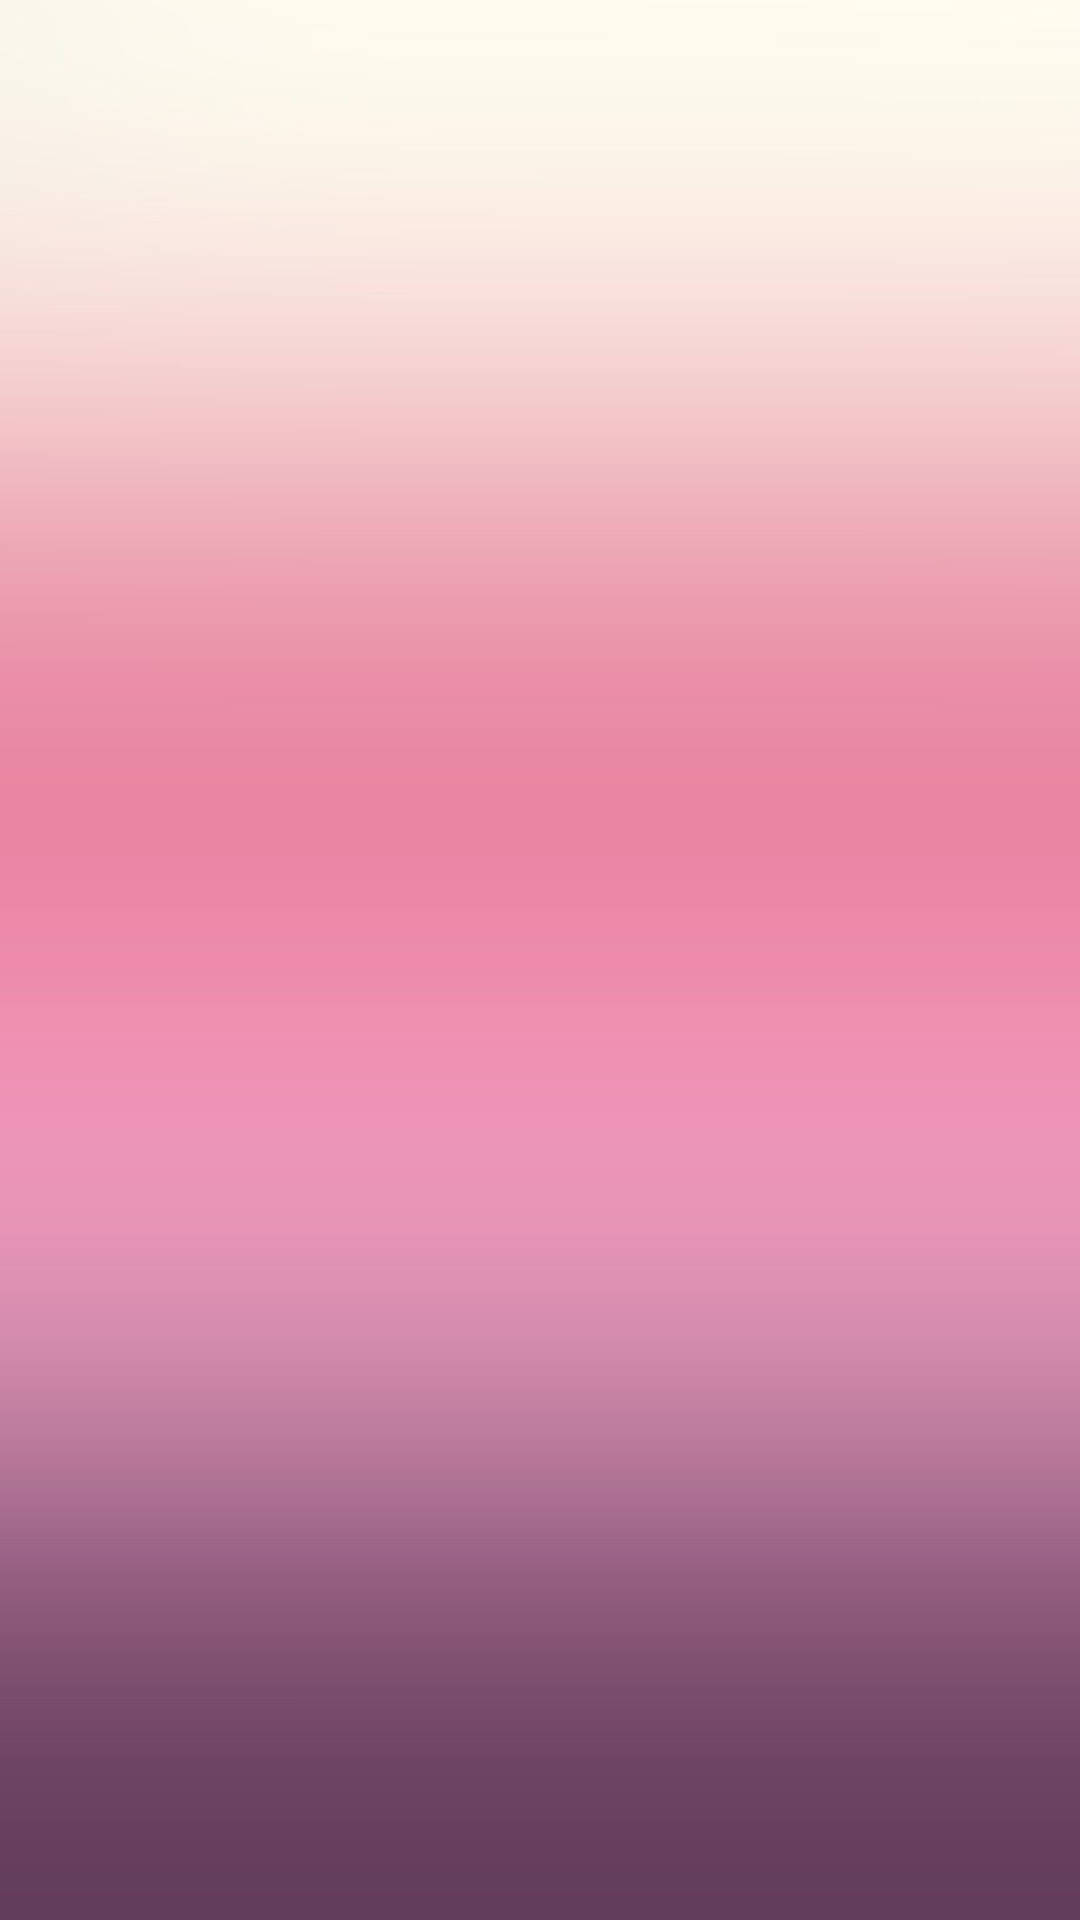 Enter a world of pastel pink with this luxurious iPhone Wallpaper